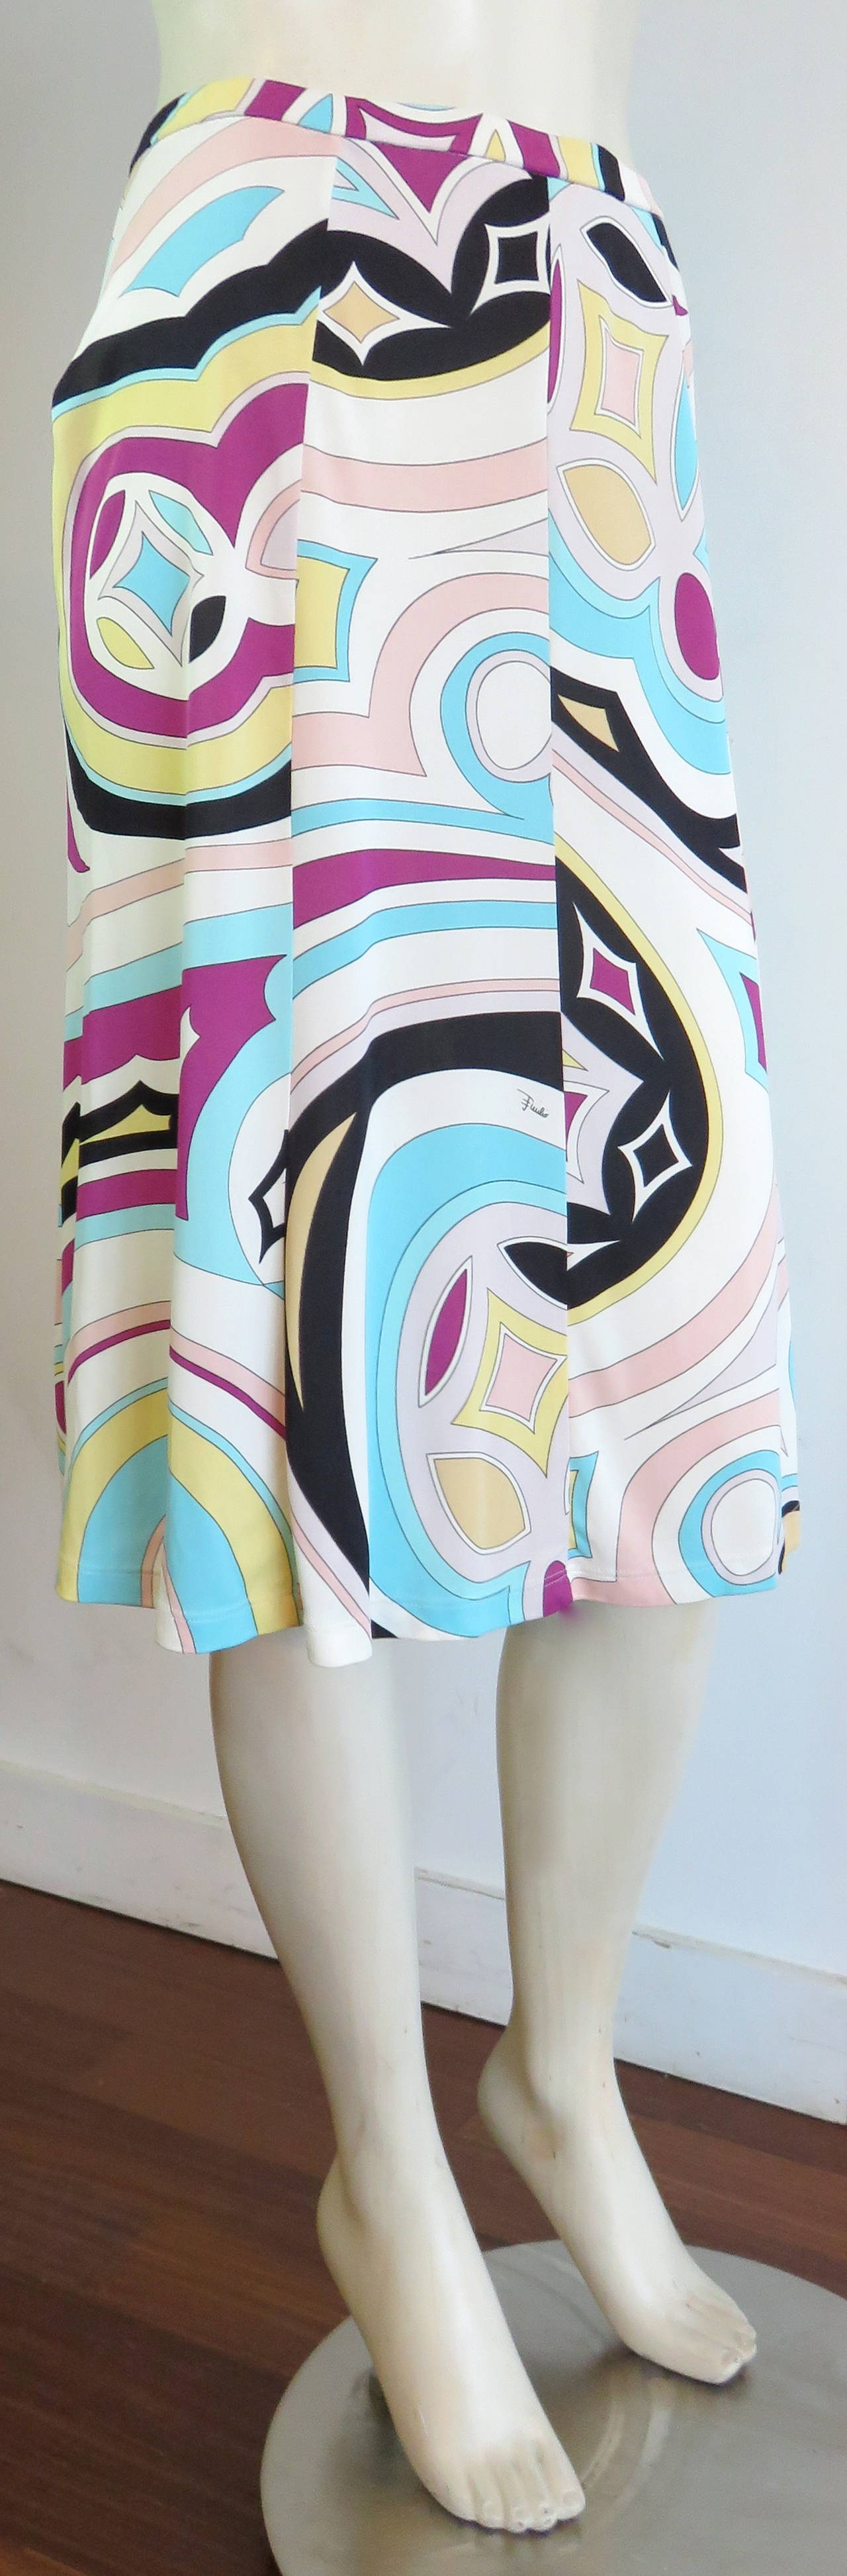 Excellent condition, EMILIO PUCCI Geometric knit skirt.

Signed, geometric printed artwork atop stretchy knit jersey fabrication.

Elasticated, stretchy waistband.

Made in Italy, as labeled.

In excellent condition with absolutely no signs